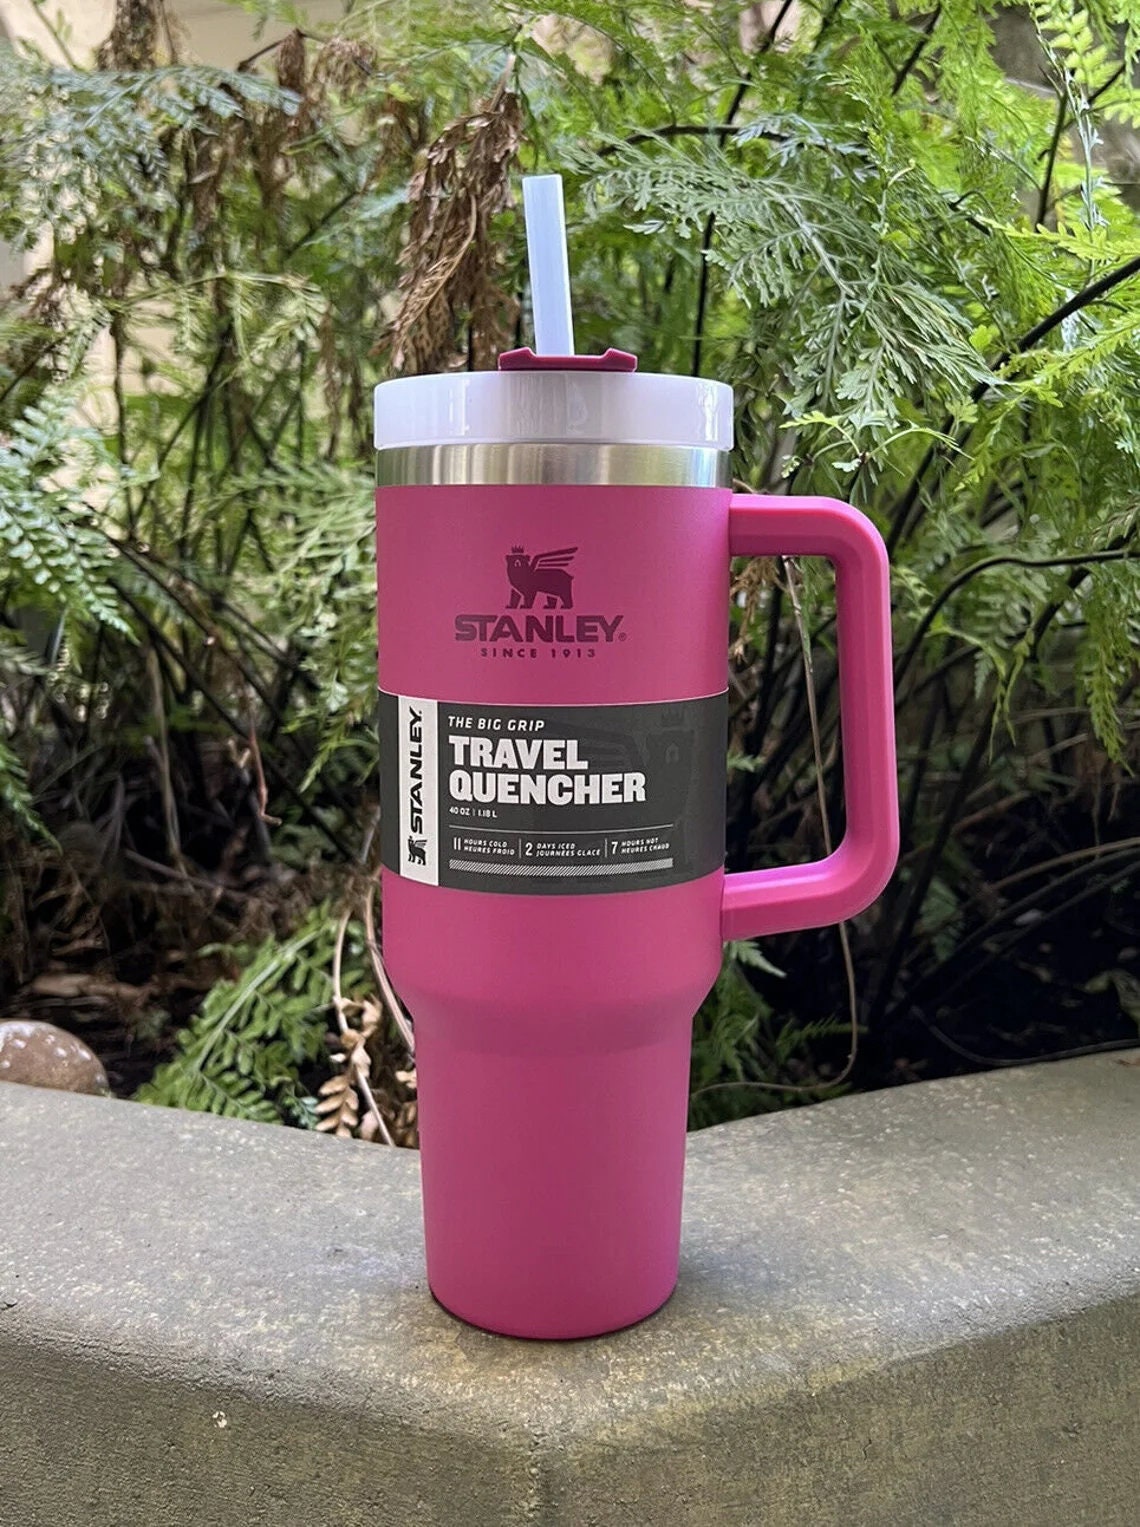 Stanley Adventure Quencher 40oz Red Lava Glass